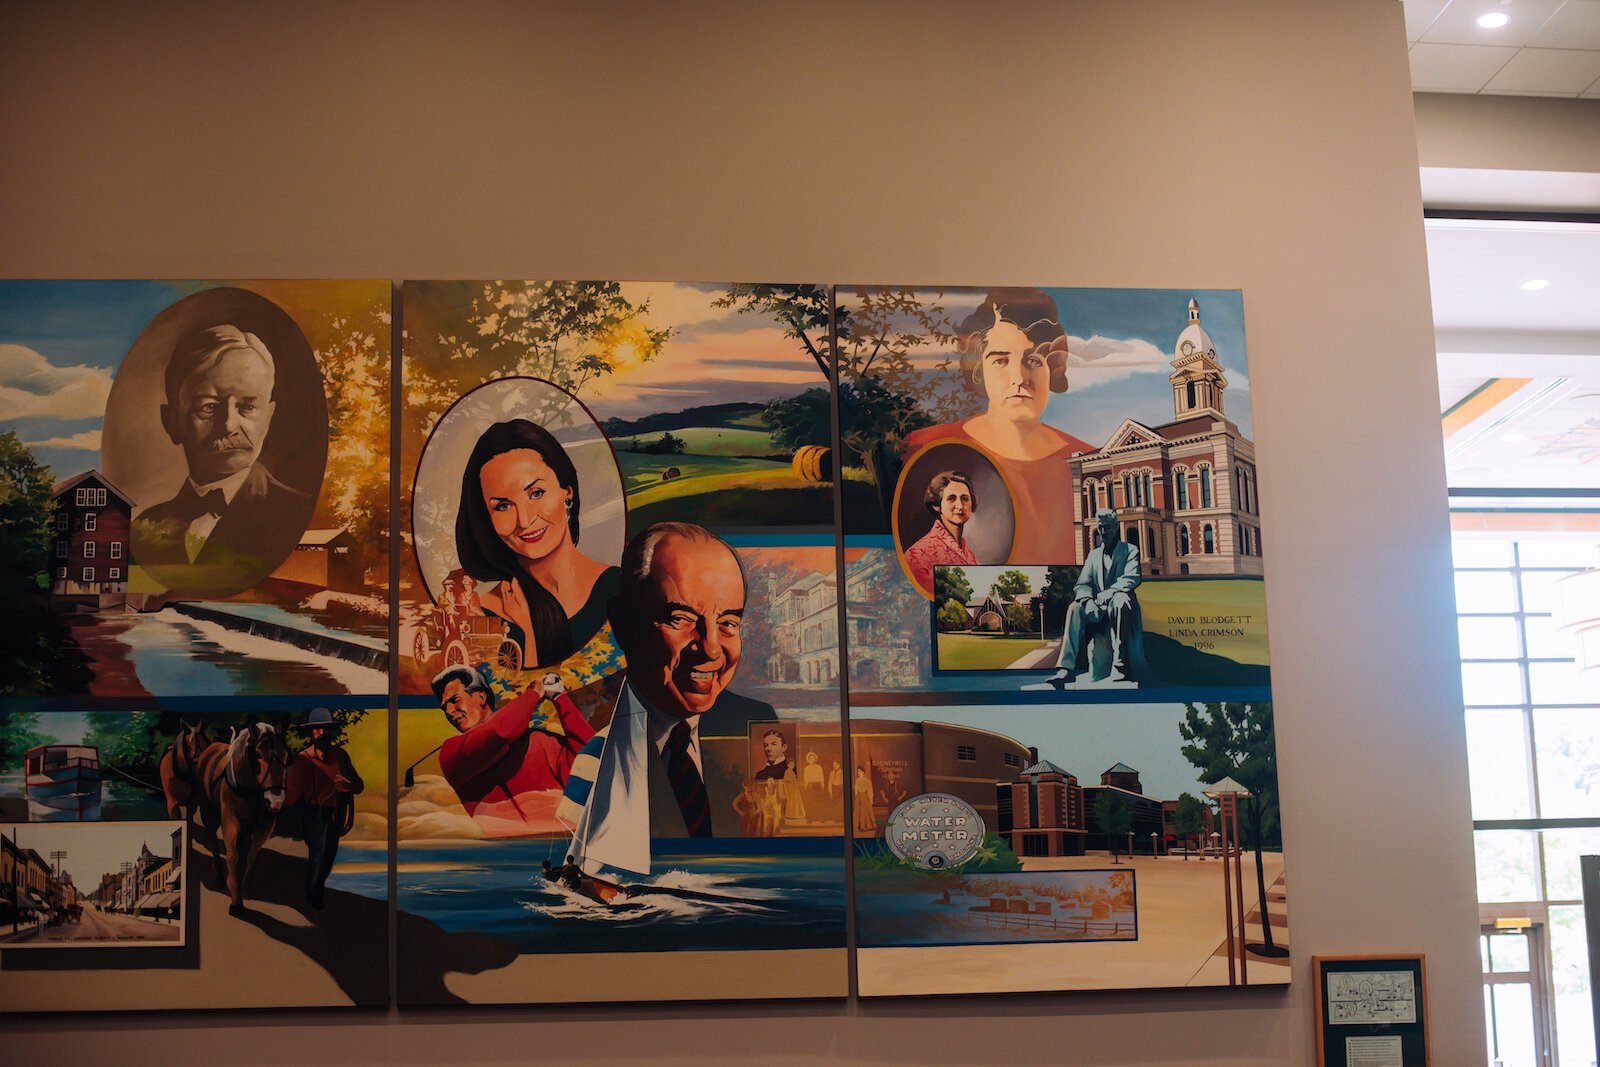 The Honeywell Center displays art for visitors to enjoy.